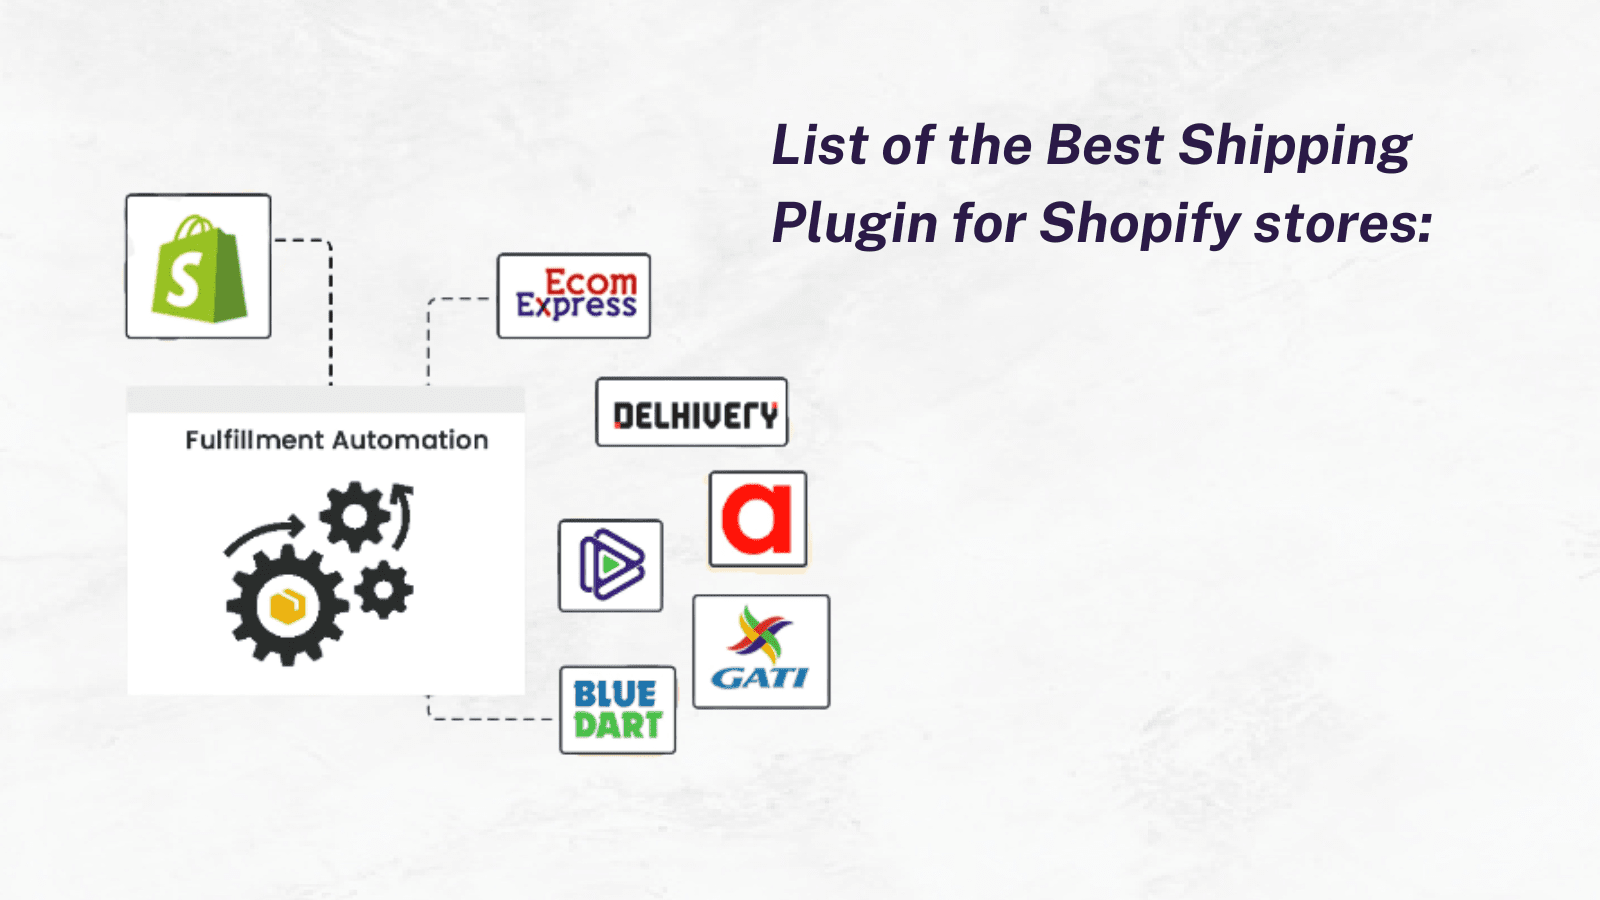 List of the best shipping plugin